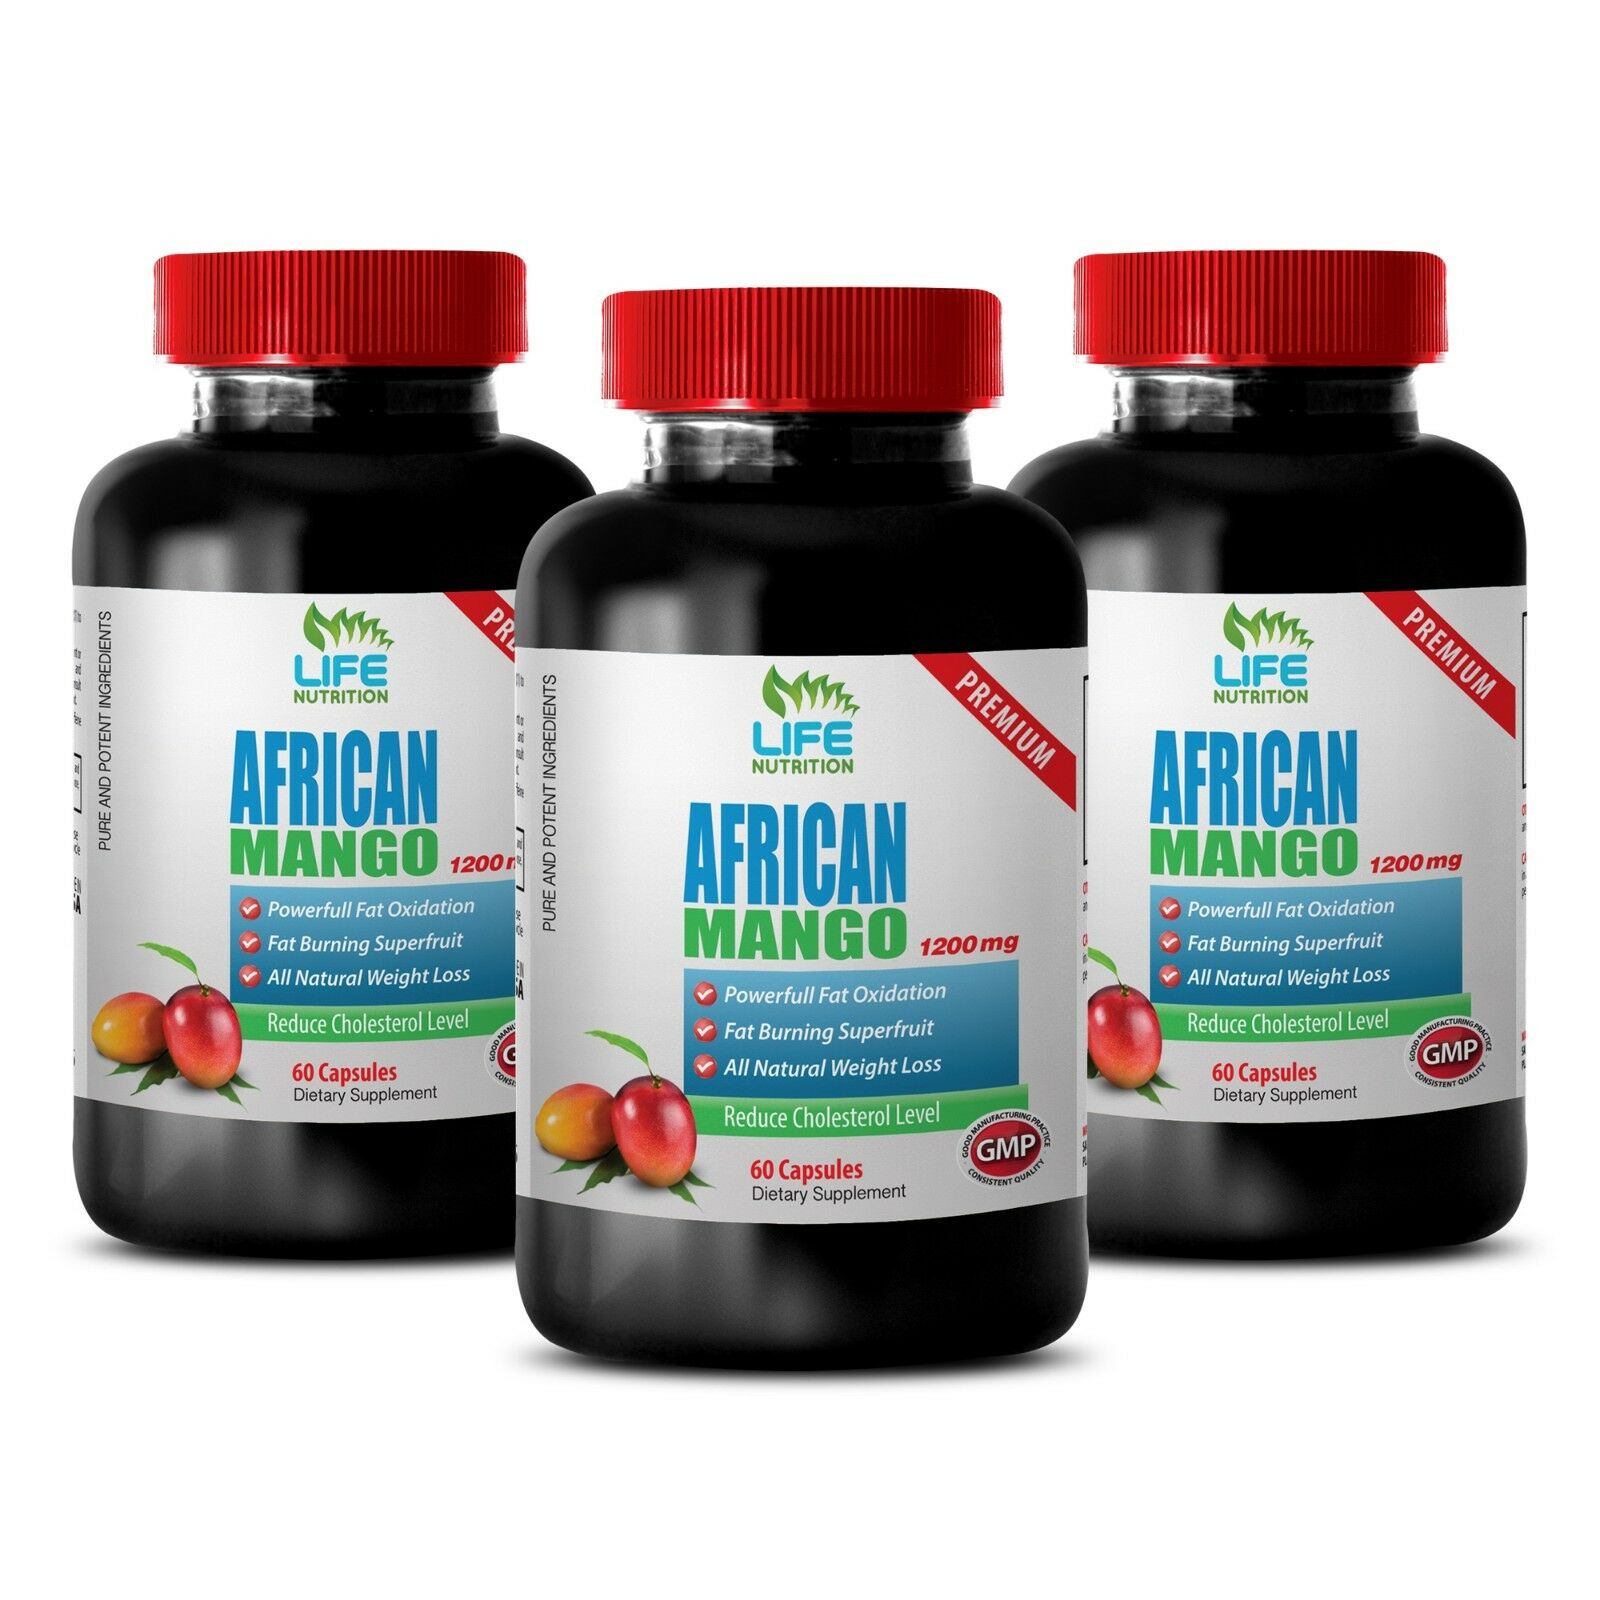 Lose Weight Quick - African Mango Lean 1200 - Burning Calories Supplements 3b